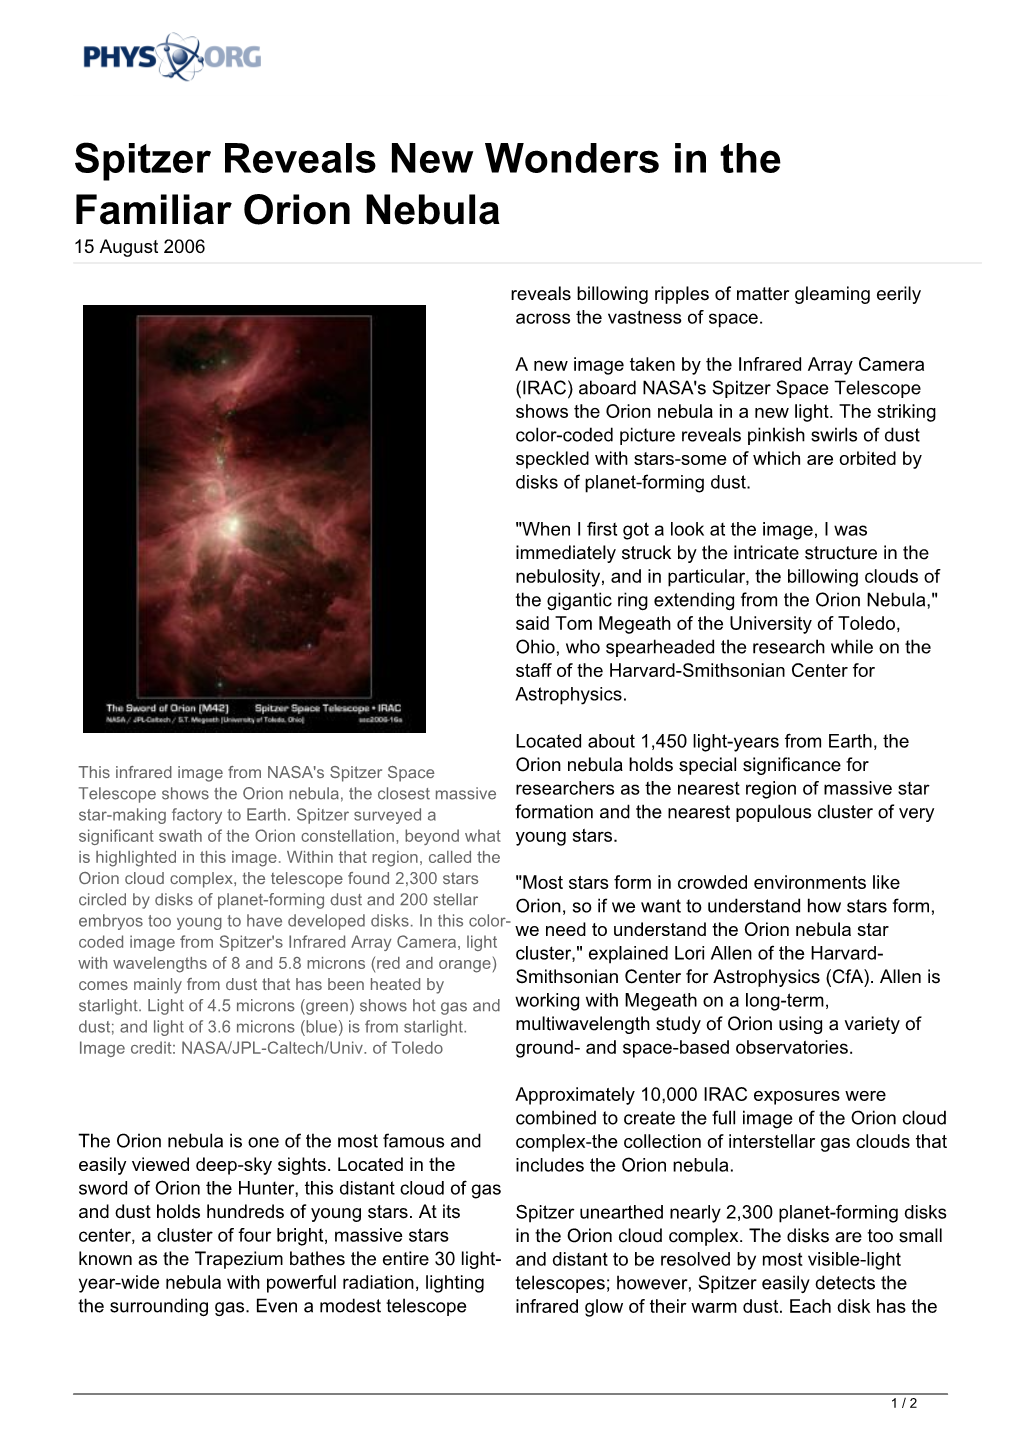 Spitzer Reveals New Wonders in the Familiar Orion Nebula 15 August 2006